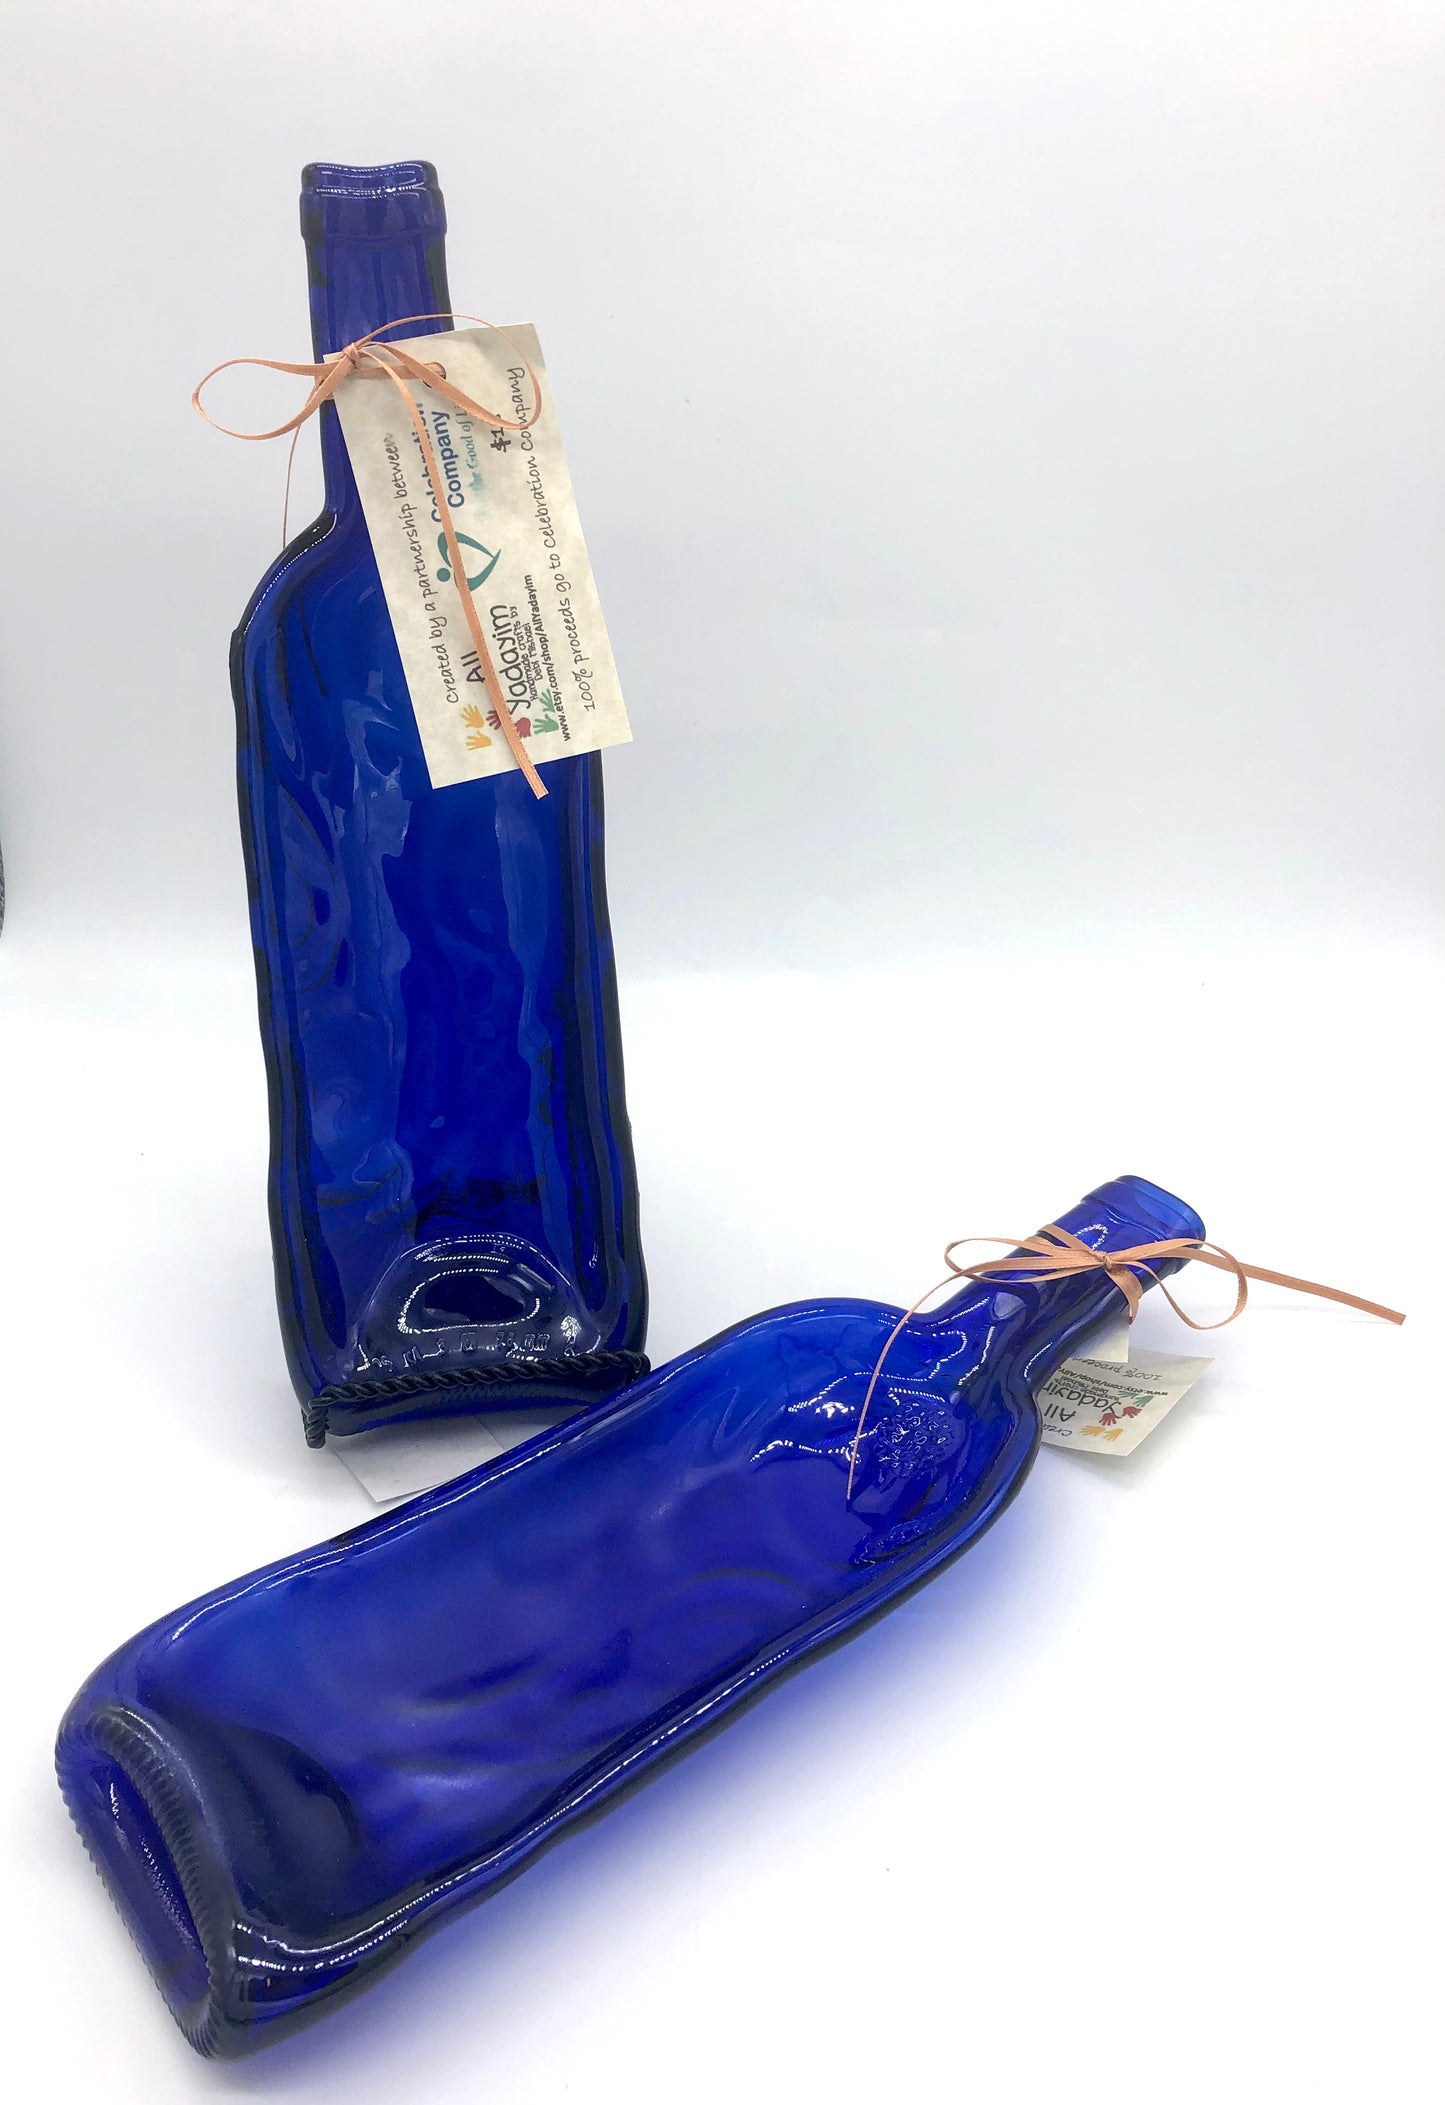 Two blue wine bottles that have been melted down and flattened